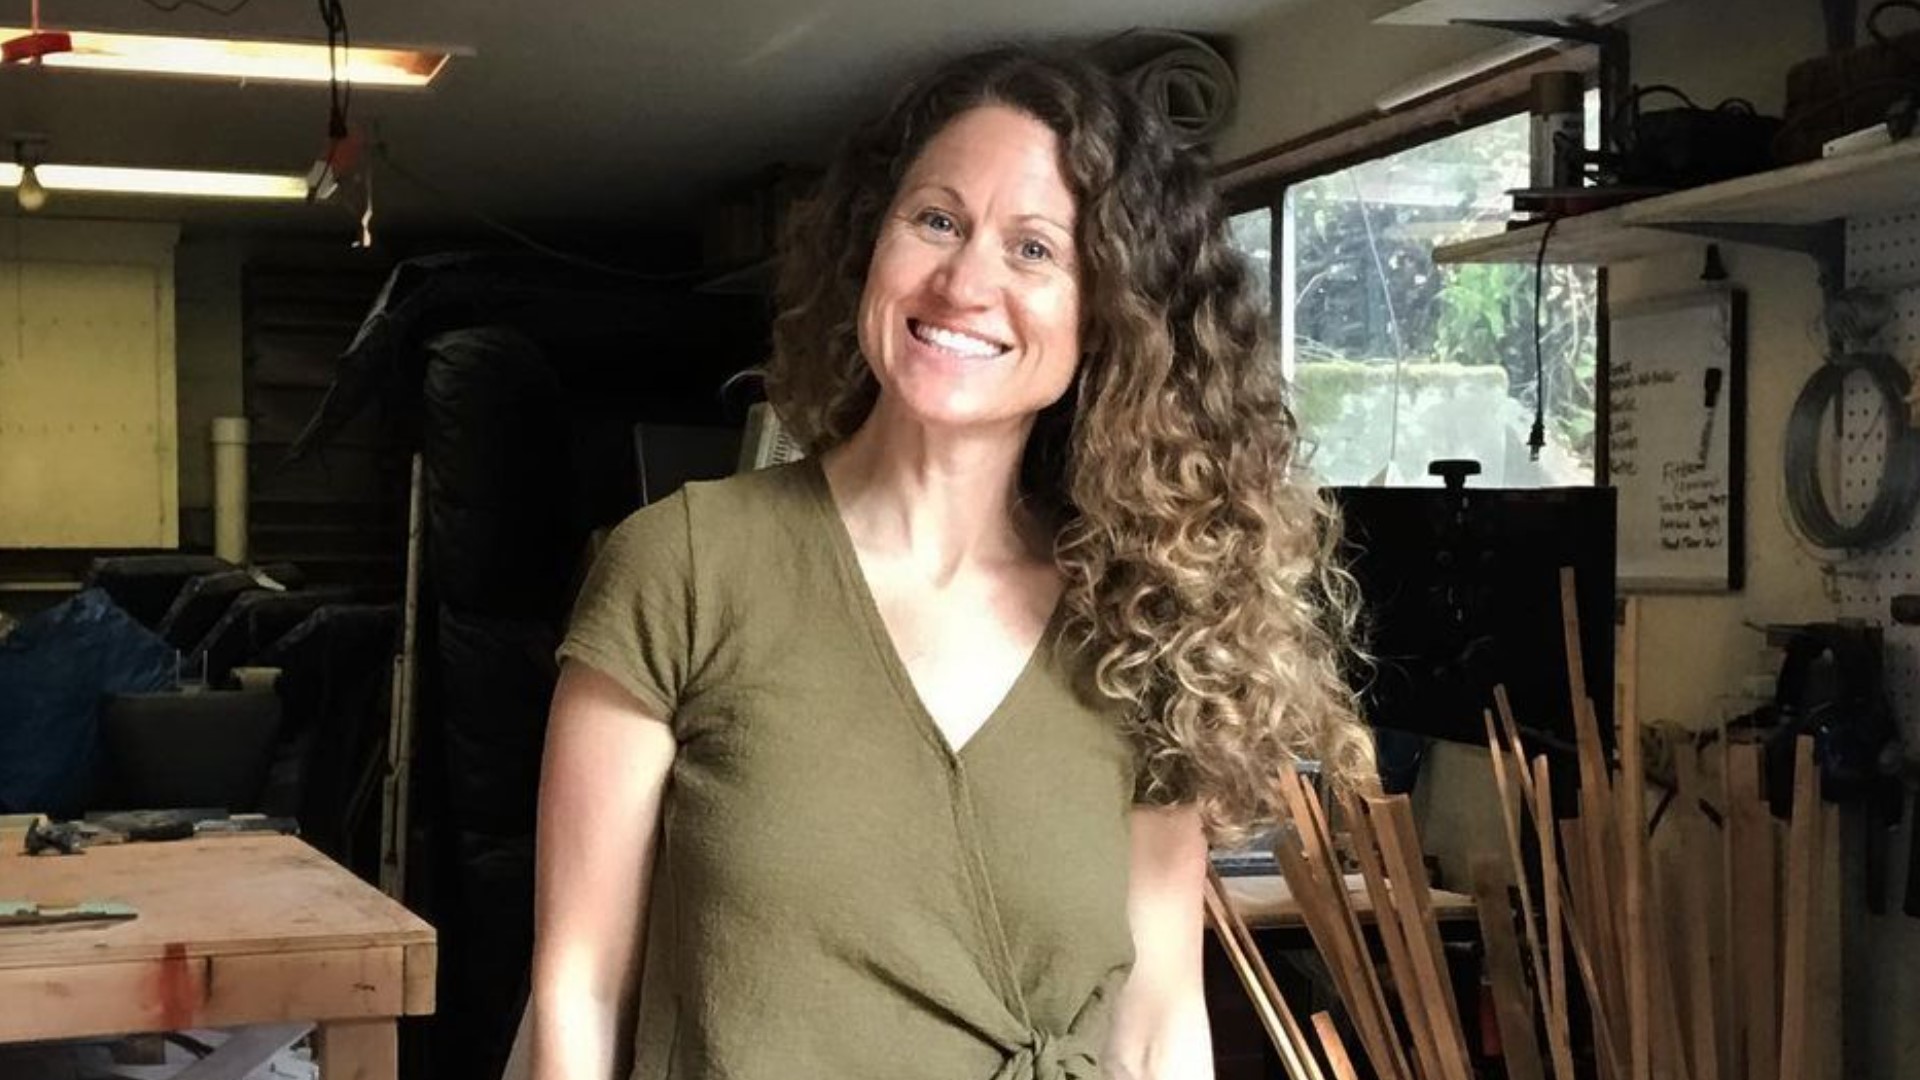 Amanda Whitworth shares furniture transformations and her cancer journey with more than 27,000 Instagram followers on her account Sawdust and Soul. #k5evening